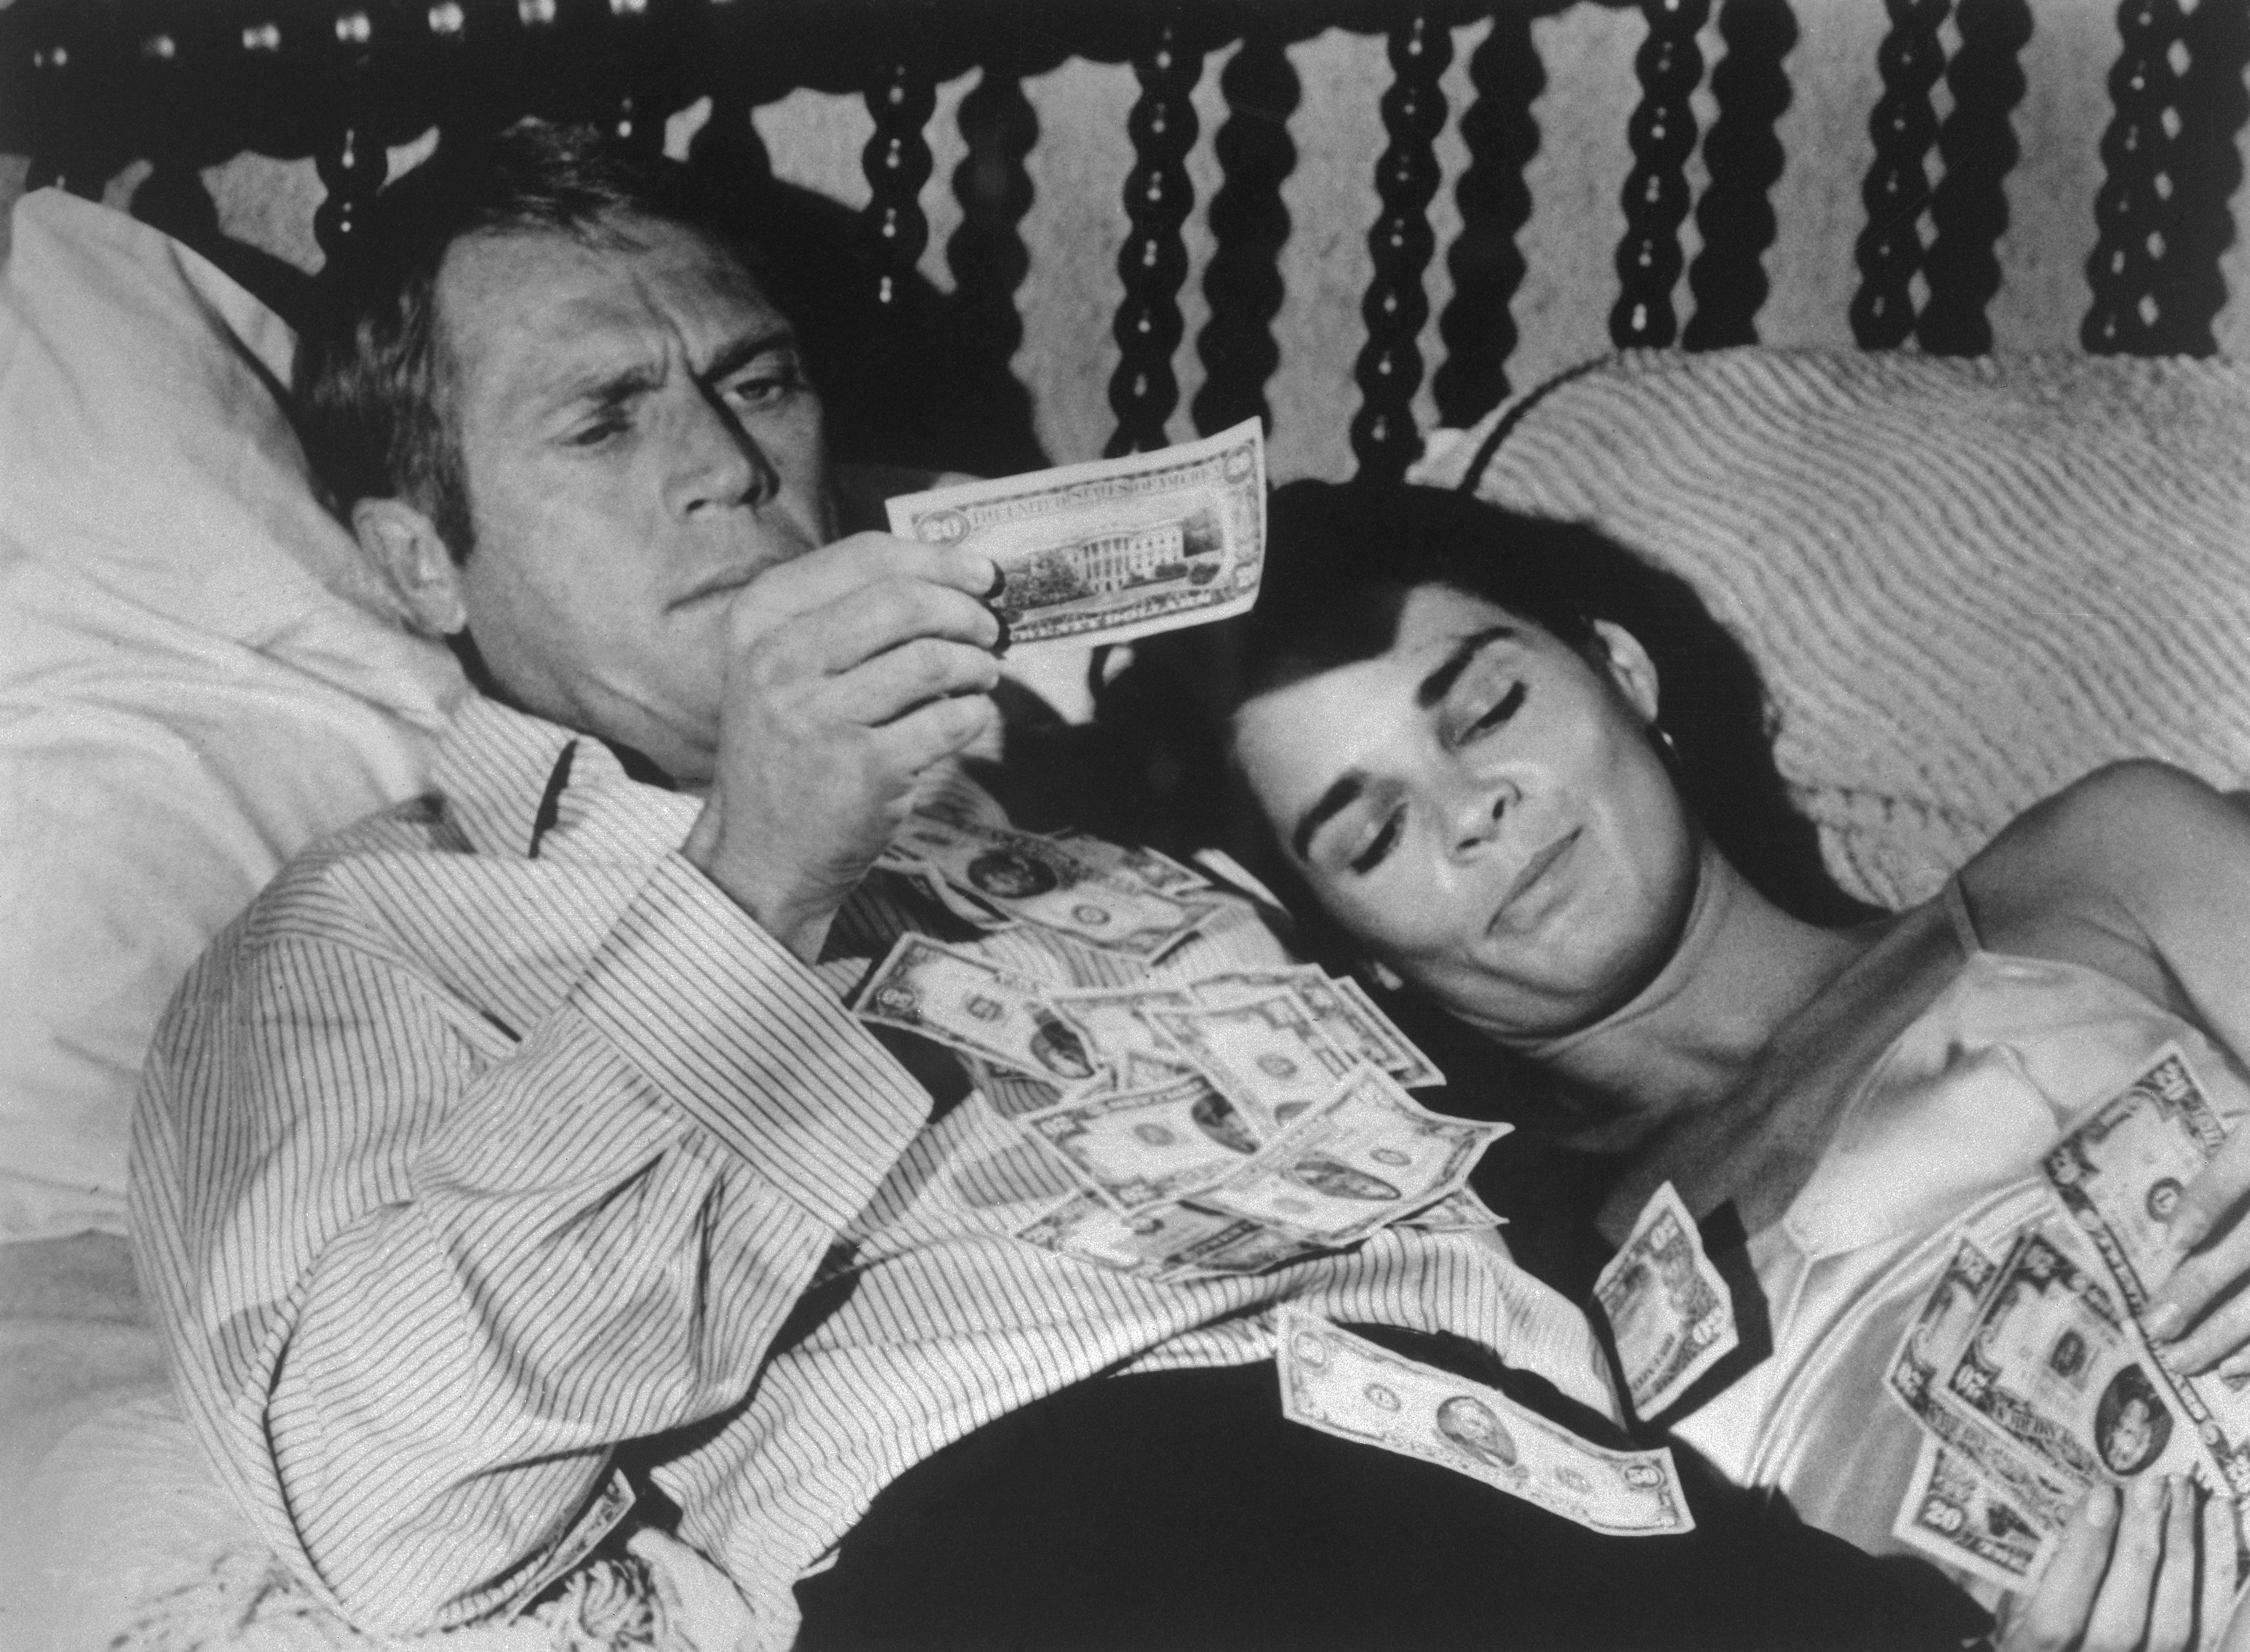 Steve McQueen and Ali McGraw in a scene from the movie "The Getaway" | Source: Getty Images